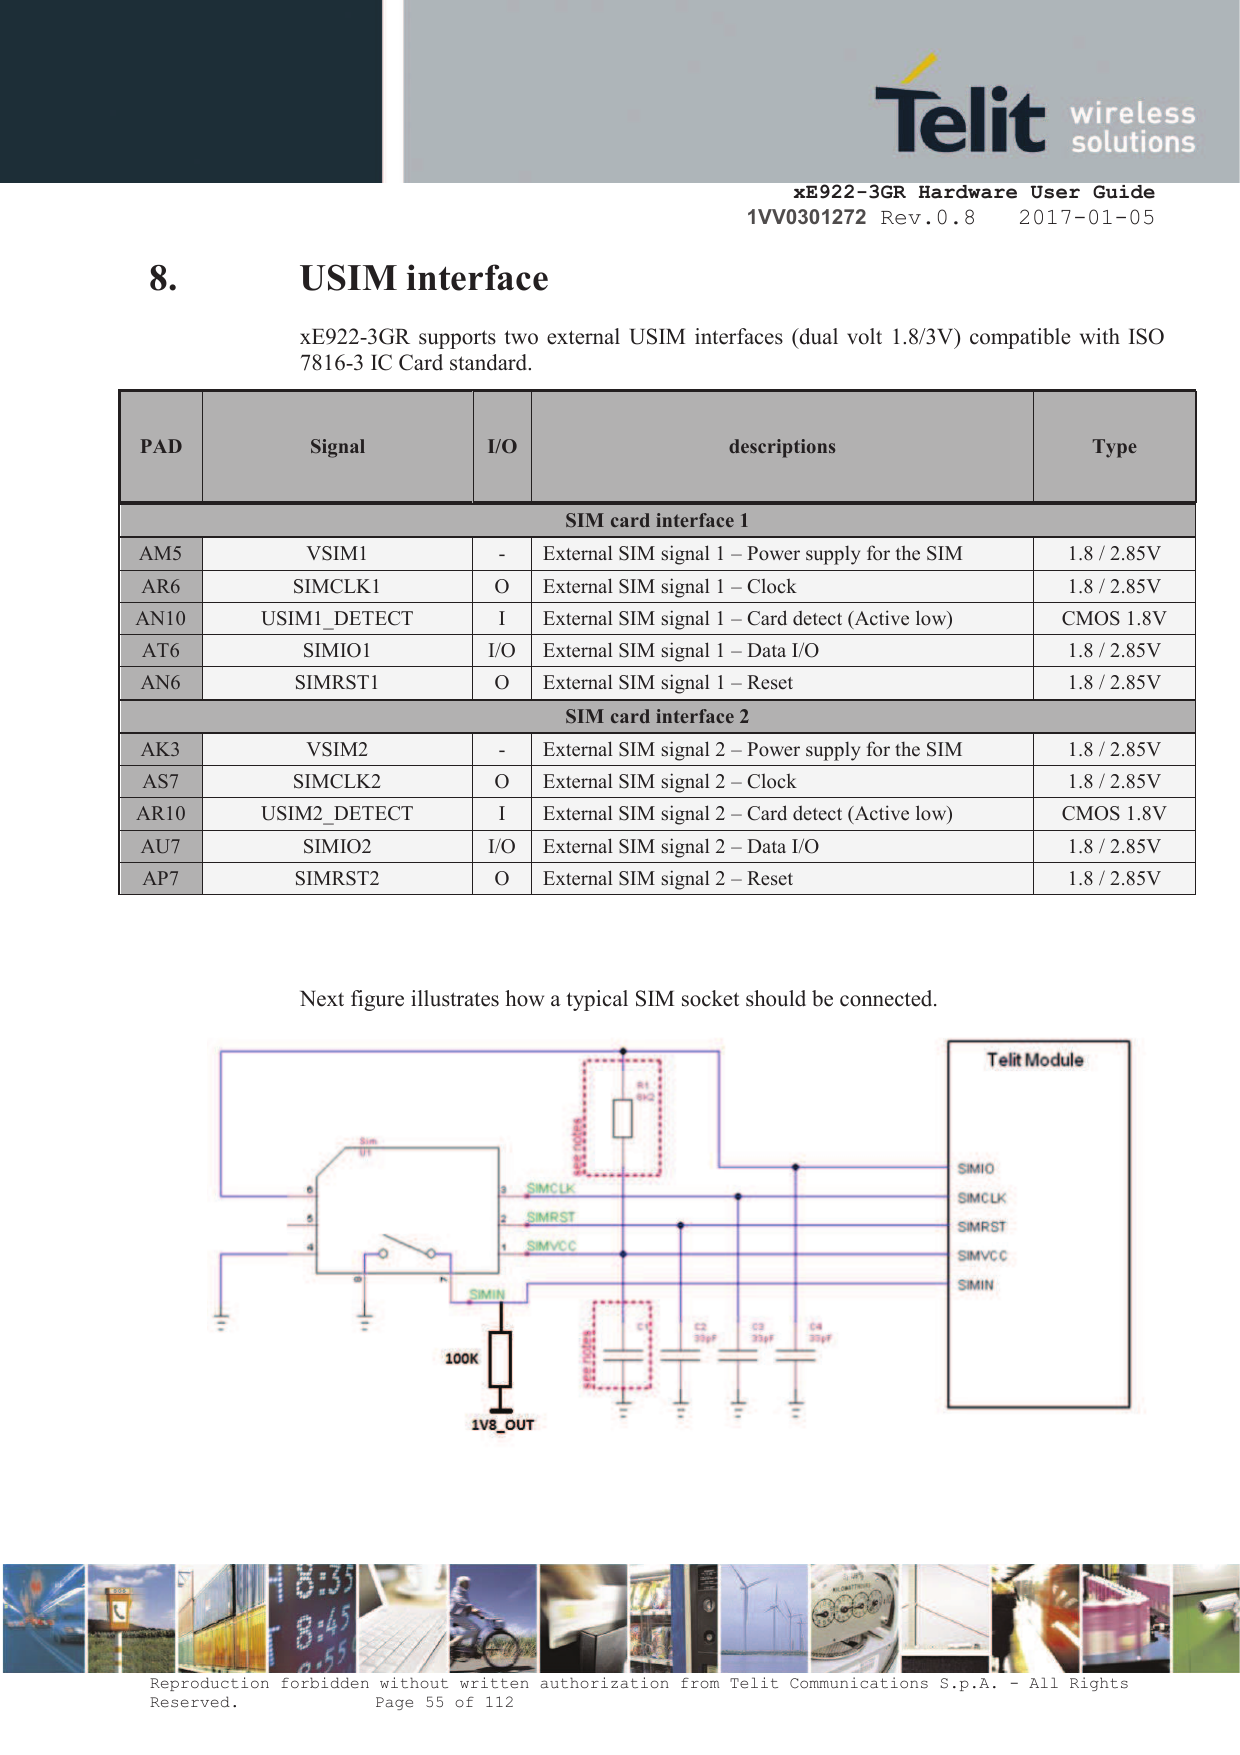     xE922-3GR Hardware User Guide 1VV0301272 Rev.0.8   2017-01-05 Reproduction forbidden without written authorization from Telit Communications S.p.A. - All Rights Reserved.    Page 55 of 112  8. USIM interface xE922-3GR supports two external USIM interfaces (dual volt 1.8/3V) compatible with ISO 7816-3 IC Card standard.  PAD Signal I/O descriptions  Type  SIM card interface 1 AM5 VSIM1 - External SIM signal 1 – Power supply for the SIM 1.8 / 2.85V AR6 SIMCLK1 O External SIM signal 1 – Clock 1.8 / 2.85V AN10 USIM1_DETECT I External SIM signal 1 – Card detect (Active low) CMOS 1.8V AT6 SIMIO1 I/O External SIM signal 1 – Data I/O 1.8 / 2.85V AN6 SIMRST1 O External SIM signal 1 – Reset 1.8 / 2.85V SIM card interface 2 AK3 VSIM2 - External SIM signal 2 – Power supply for the SIM 1.8 / 2.85V AS7 SIMCLK2 O External SIM signal 2 – Clock 1.8 / 2.85V AR10 USIM2_DETECT I External SIM signal 2 – Card detect (Active low) CMOS 1.8V AU7 SIMIO2 I/O External SIM signal 2 – Data I/O 1.8 / 2.85V AP7 SIMRST2 O External SIM signal 2 – Reset 1.8 / 2.85V   Next figure illustrates how a typical SIM socket should be connected.     